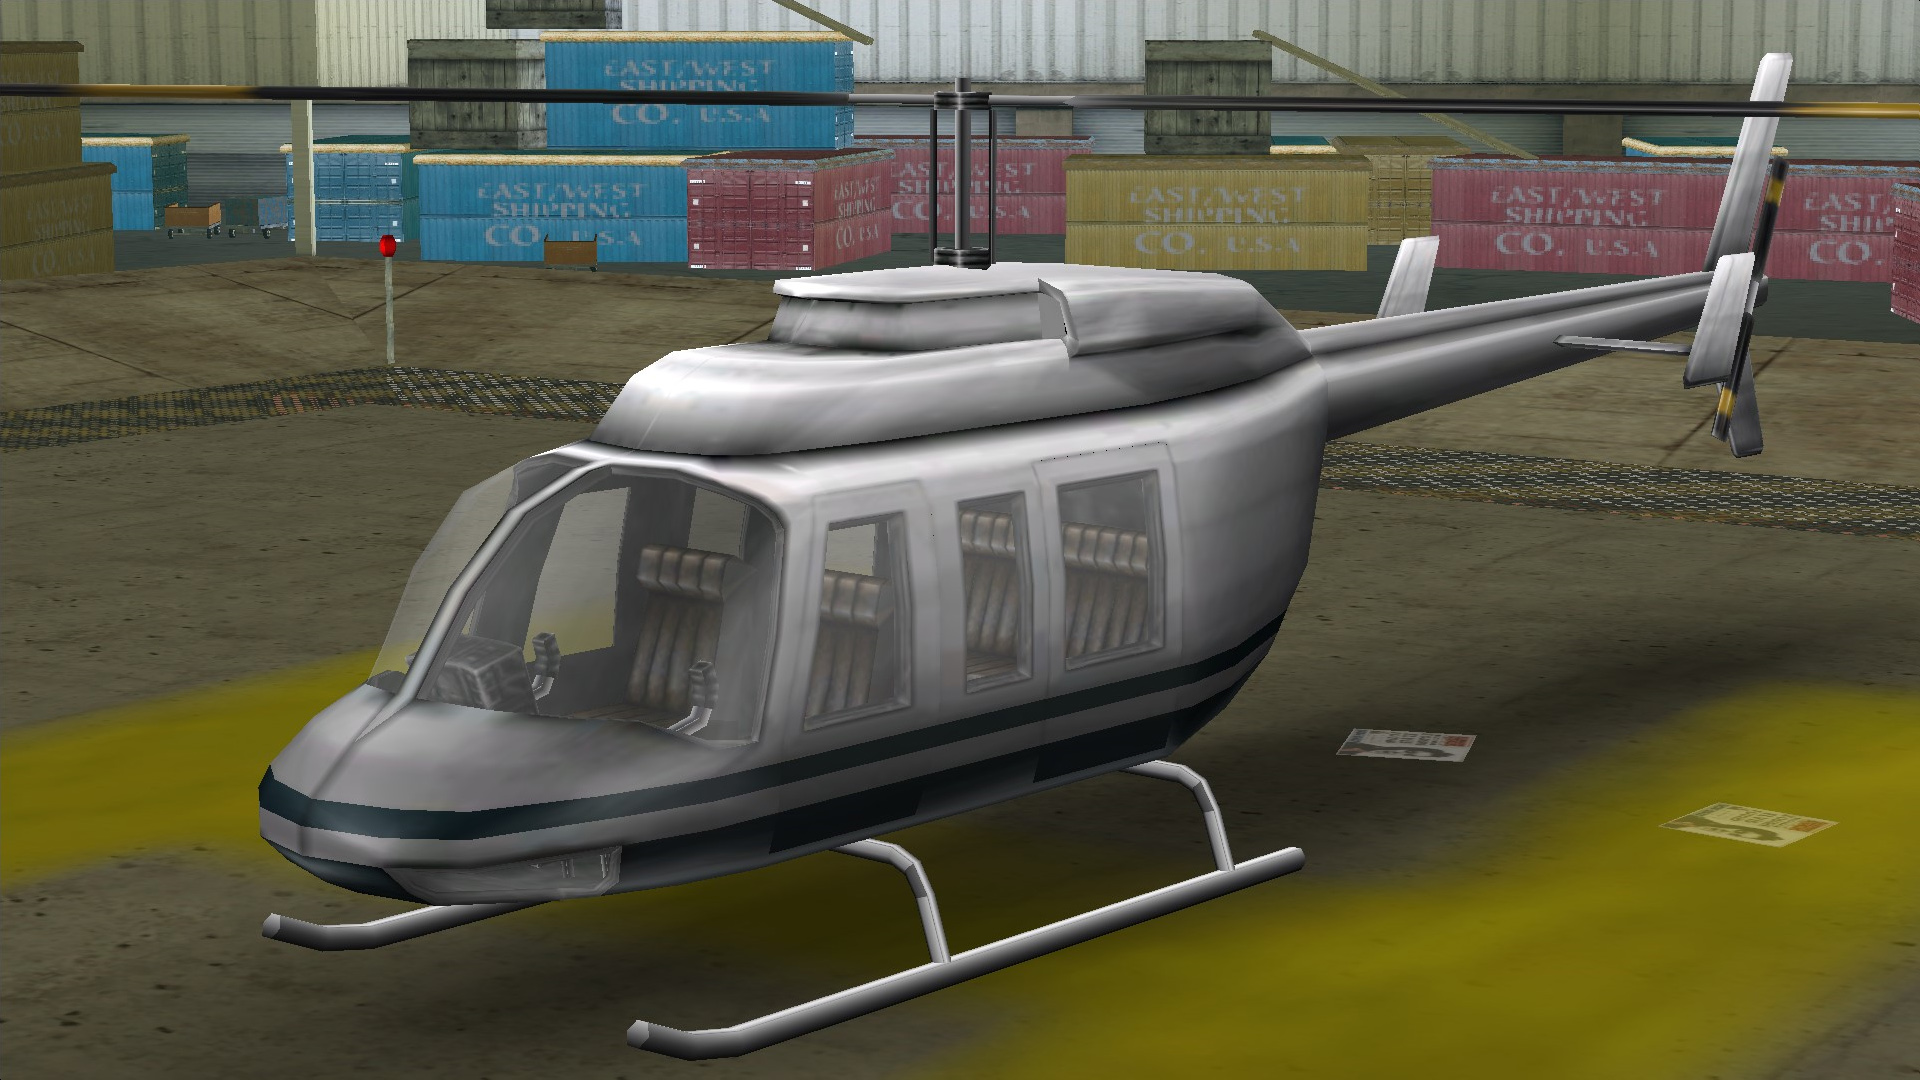 gta iv helicopter cheat